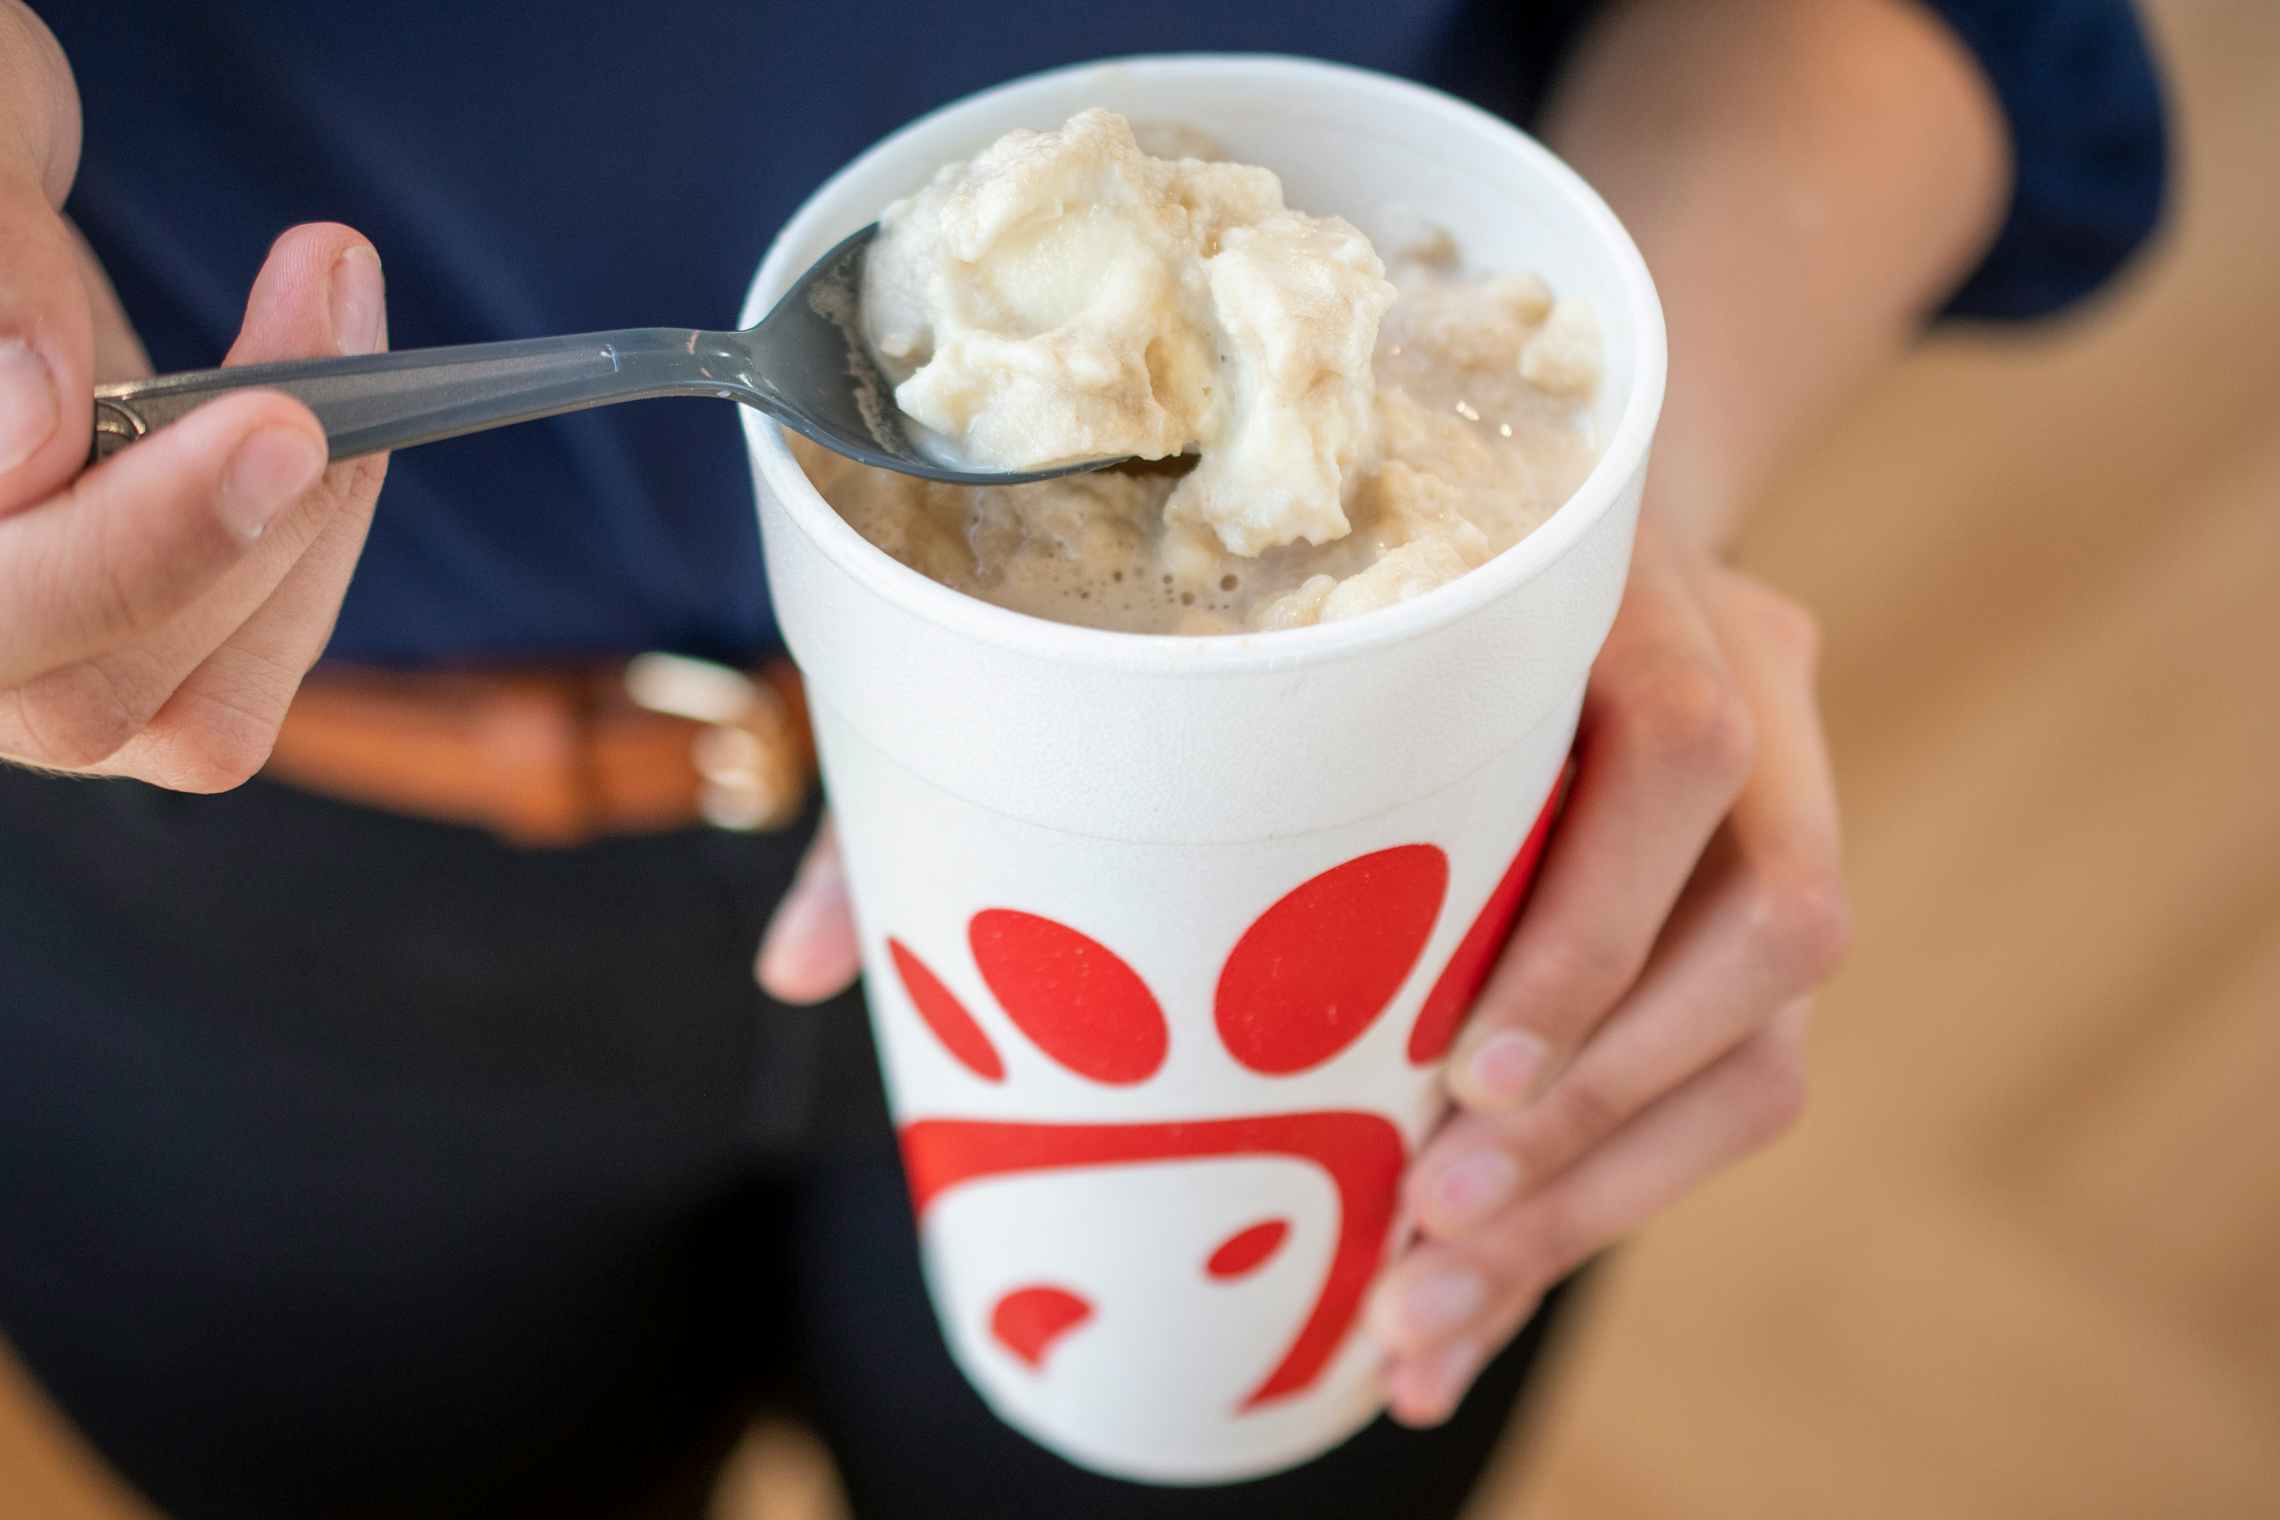 A person using a spoon to scoop ice cream from a root beer float in a Chick-fil-a cup.